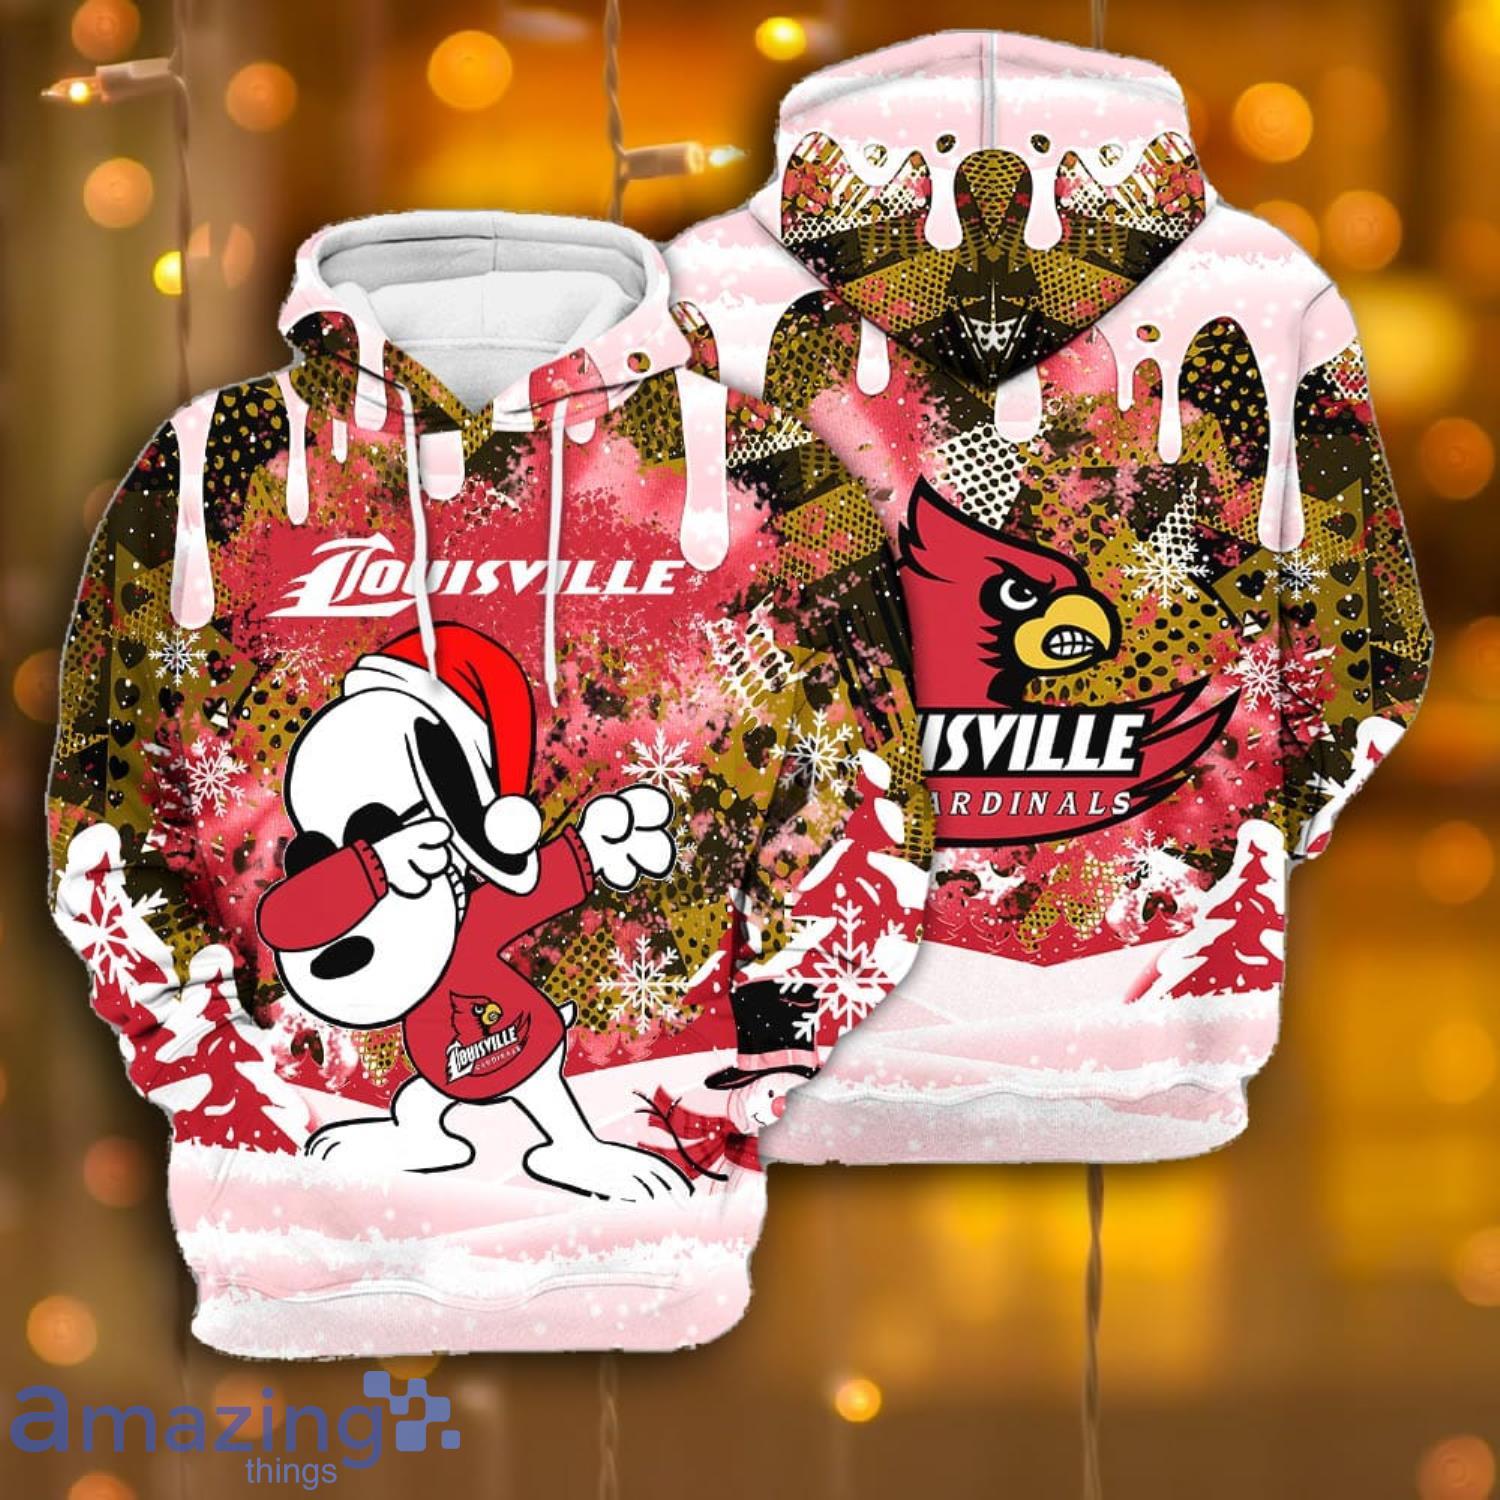 Louisville Cardinals Snoopy Cute Heart American Sports Team Funny 3D Sweater  For Men And Women Gift Christmas - Banantees